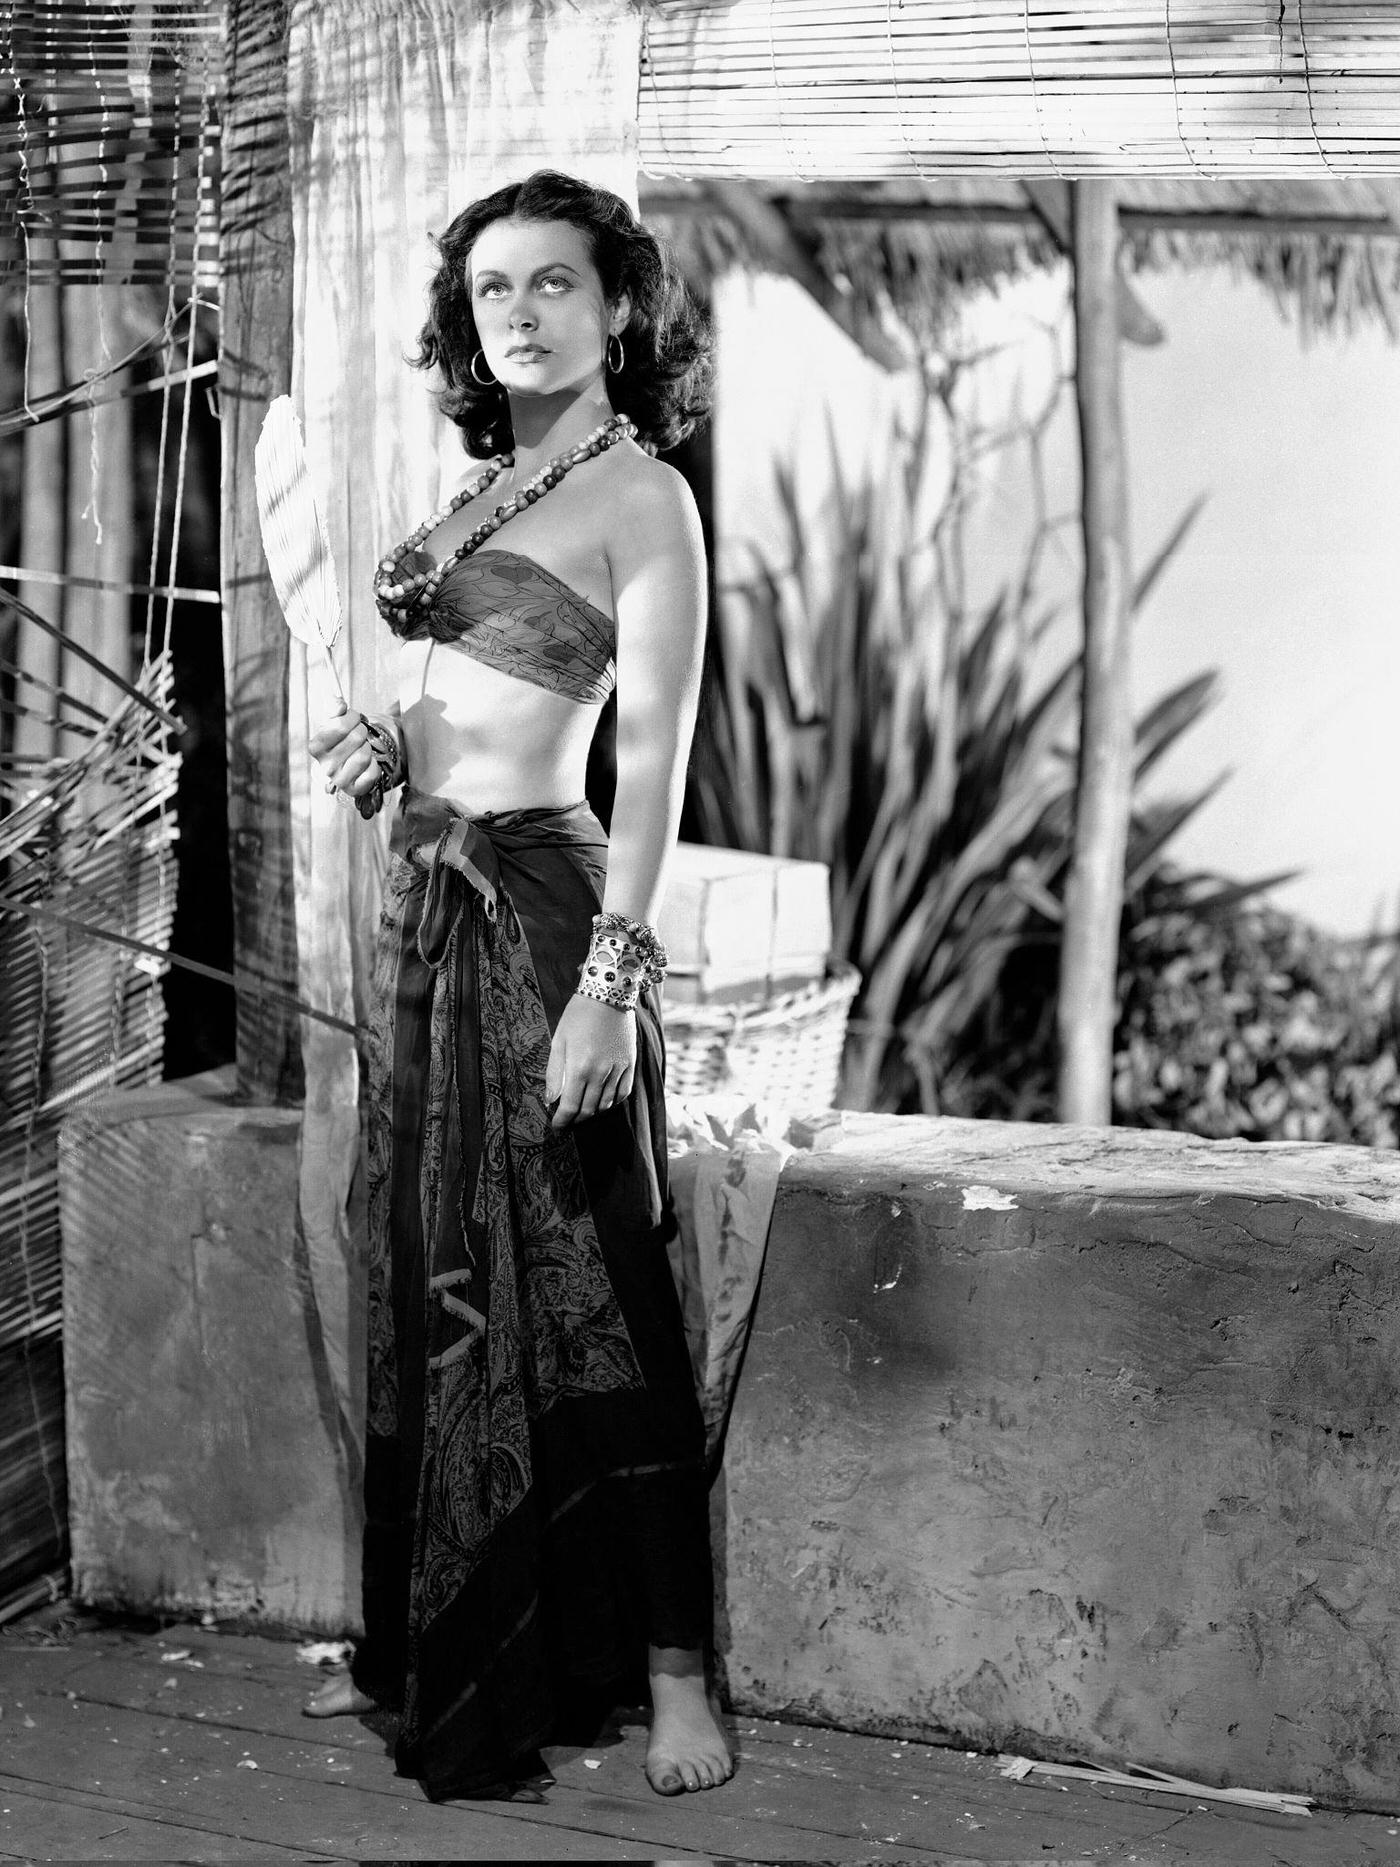 Hedy Lamarr on the set of White Cargo, based on the novel by Ida Vera Simonton and directed by Richard Thorpe.